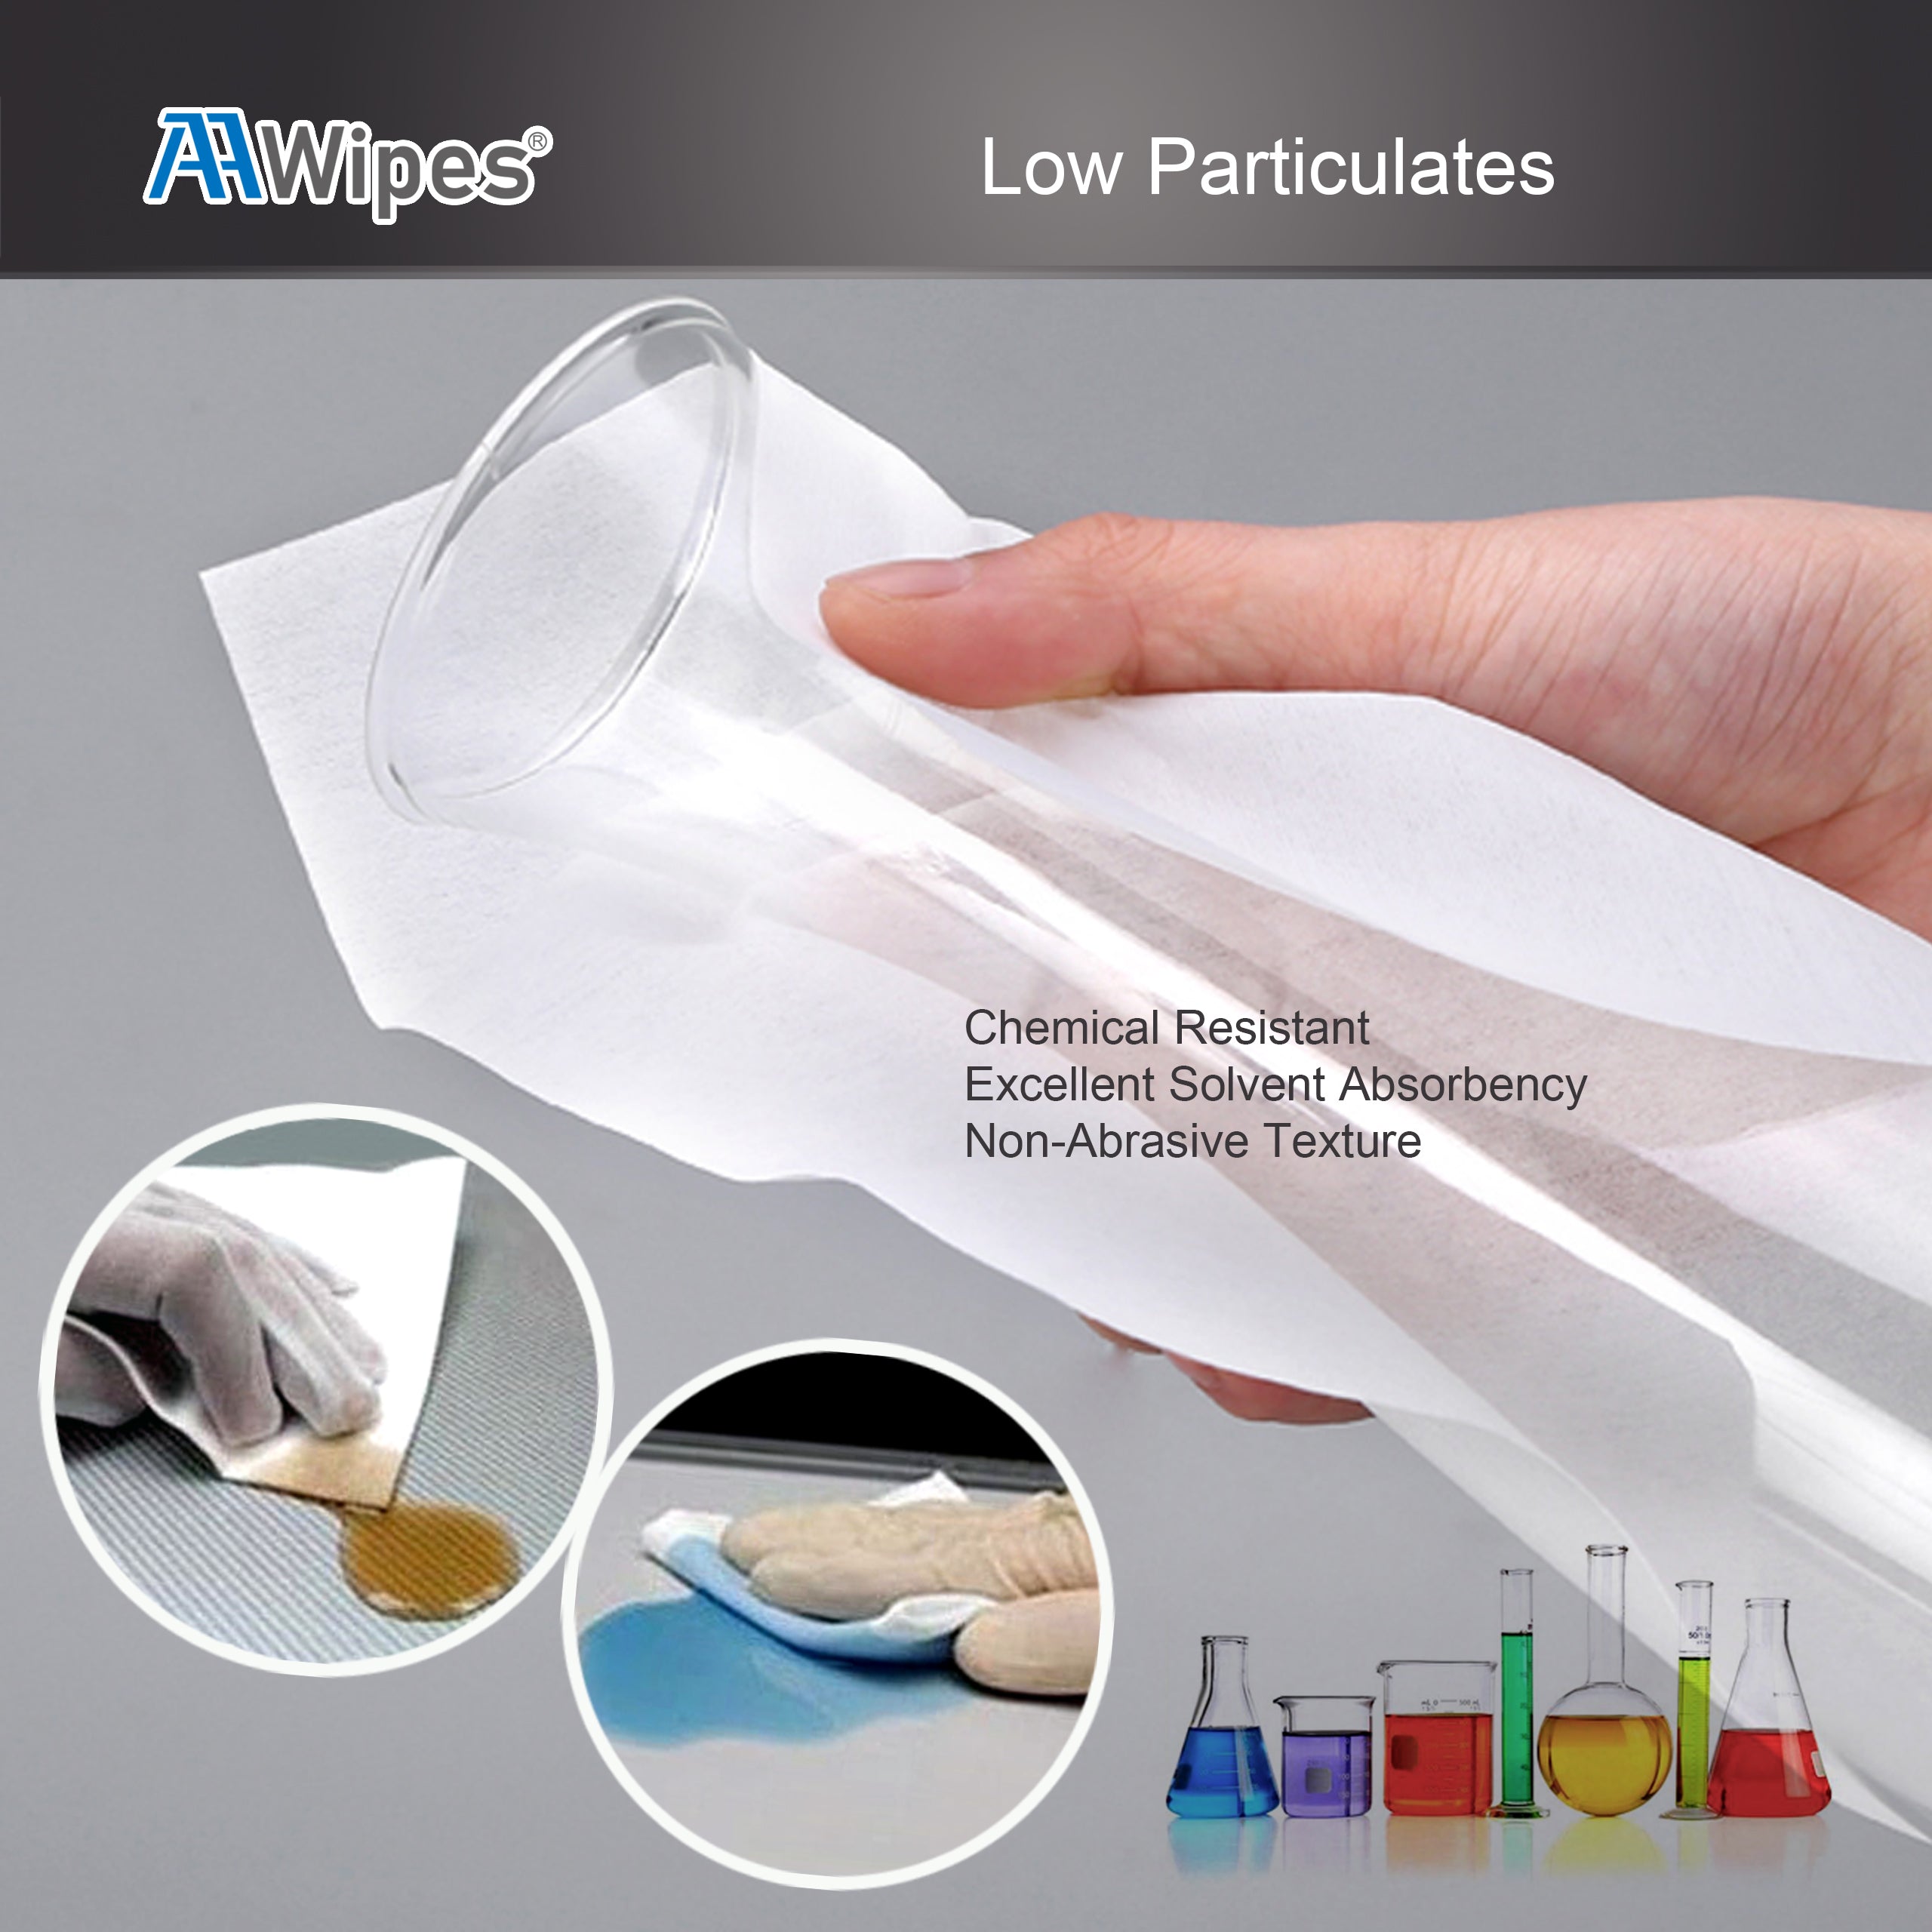 Disposable Cleanroom Nonwoven Wipes, Cellulose/Polyester Blend Nonwoven Wiper, 6" x 6" (Starting at 1 Box 9,000 Wipes per 30 Bags, No. NW06806)